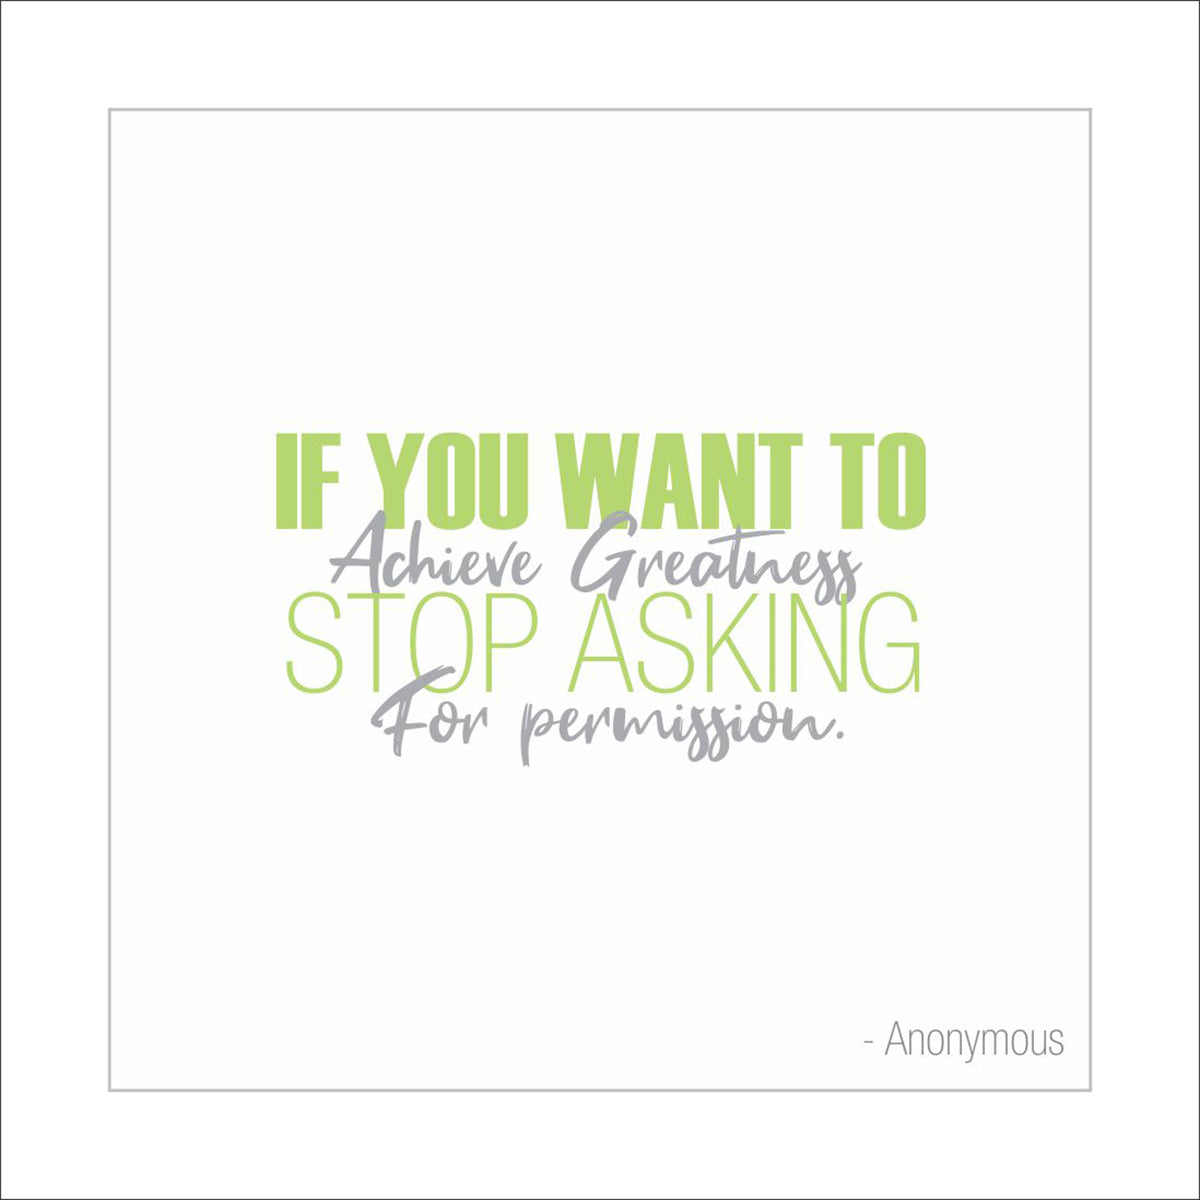 If you want to achieve greatness stop asking for permission.